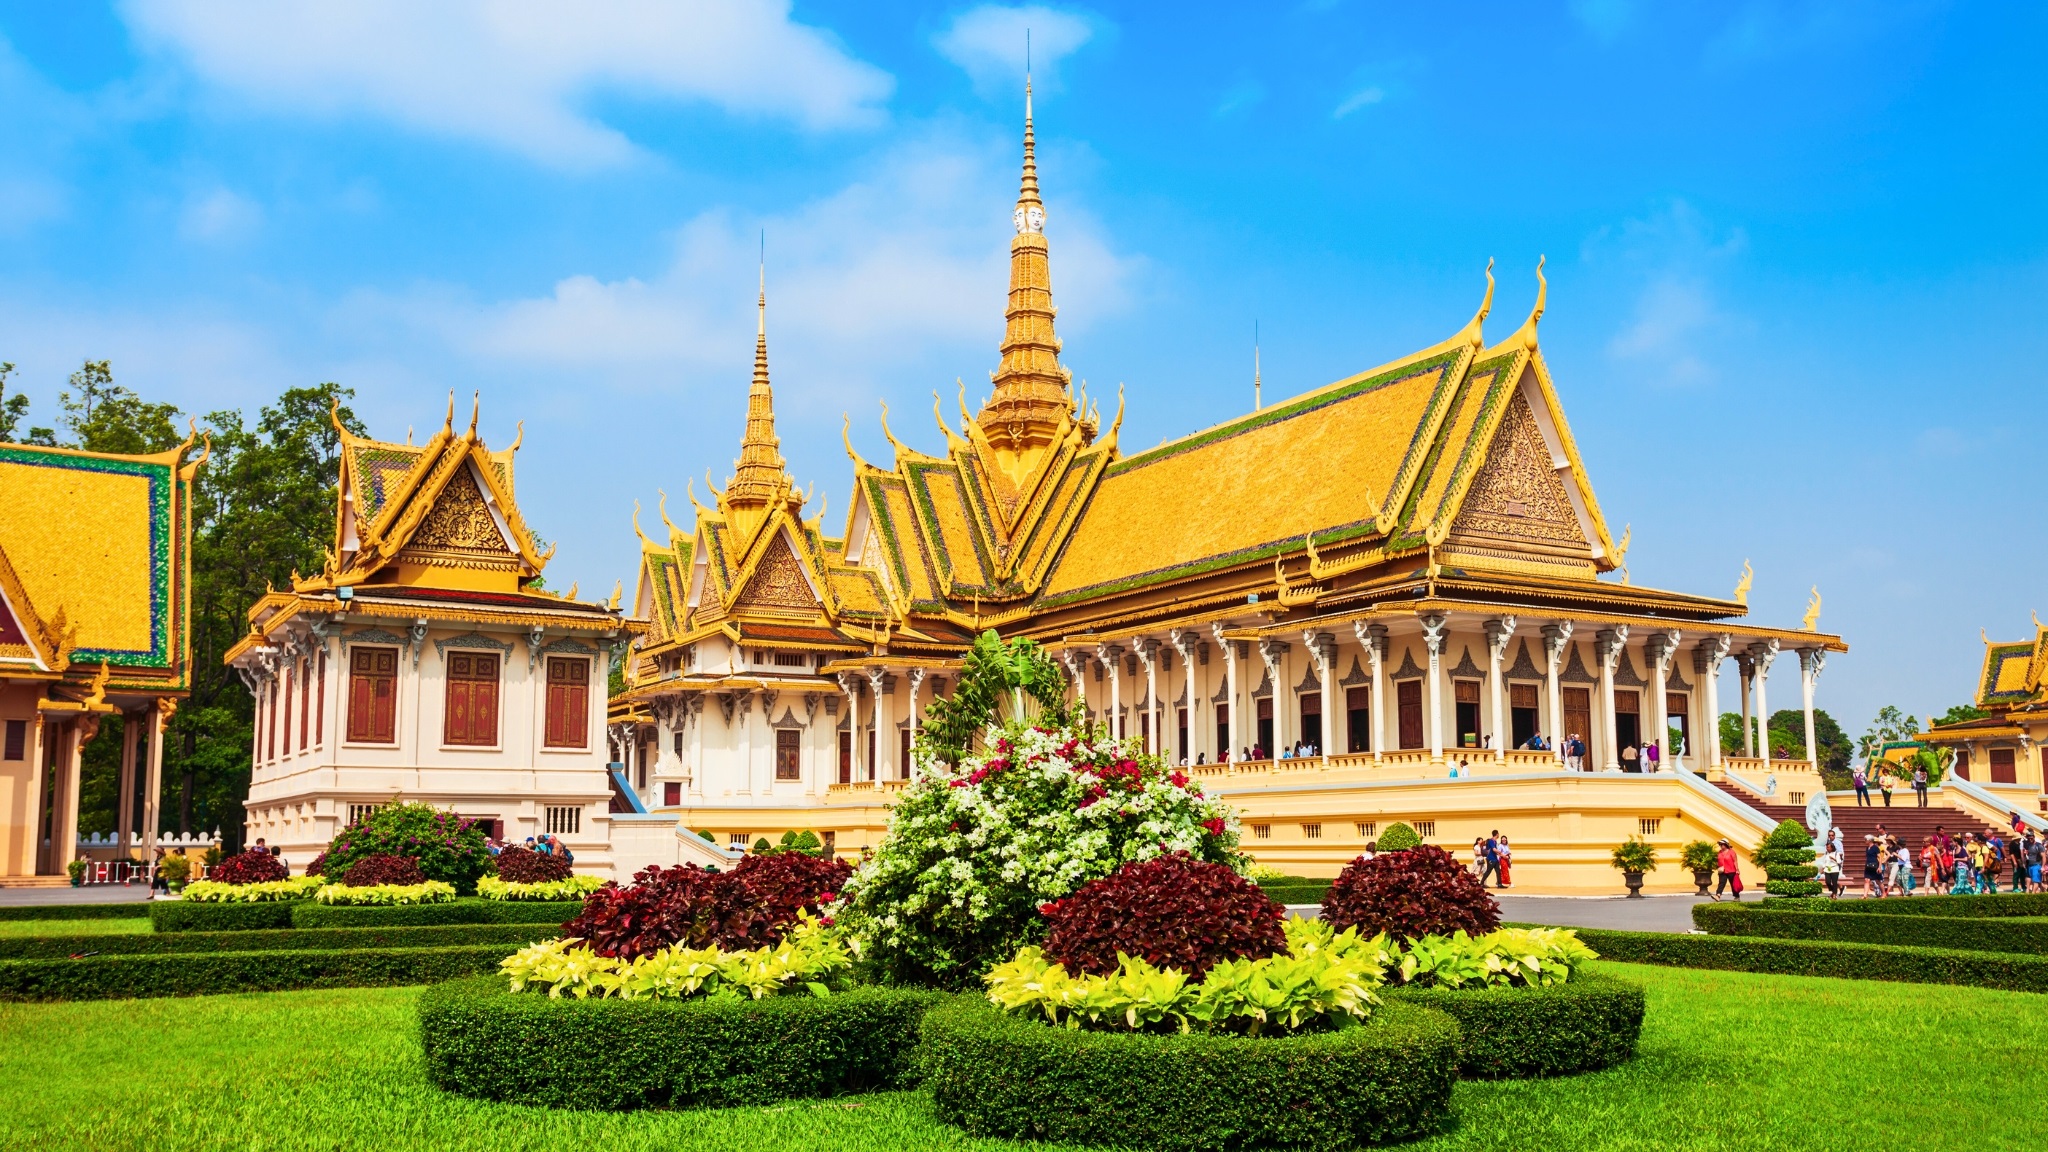 Royal Palace Showcases Traditional Khmer Architecture With French Influences